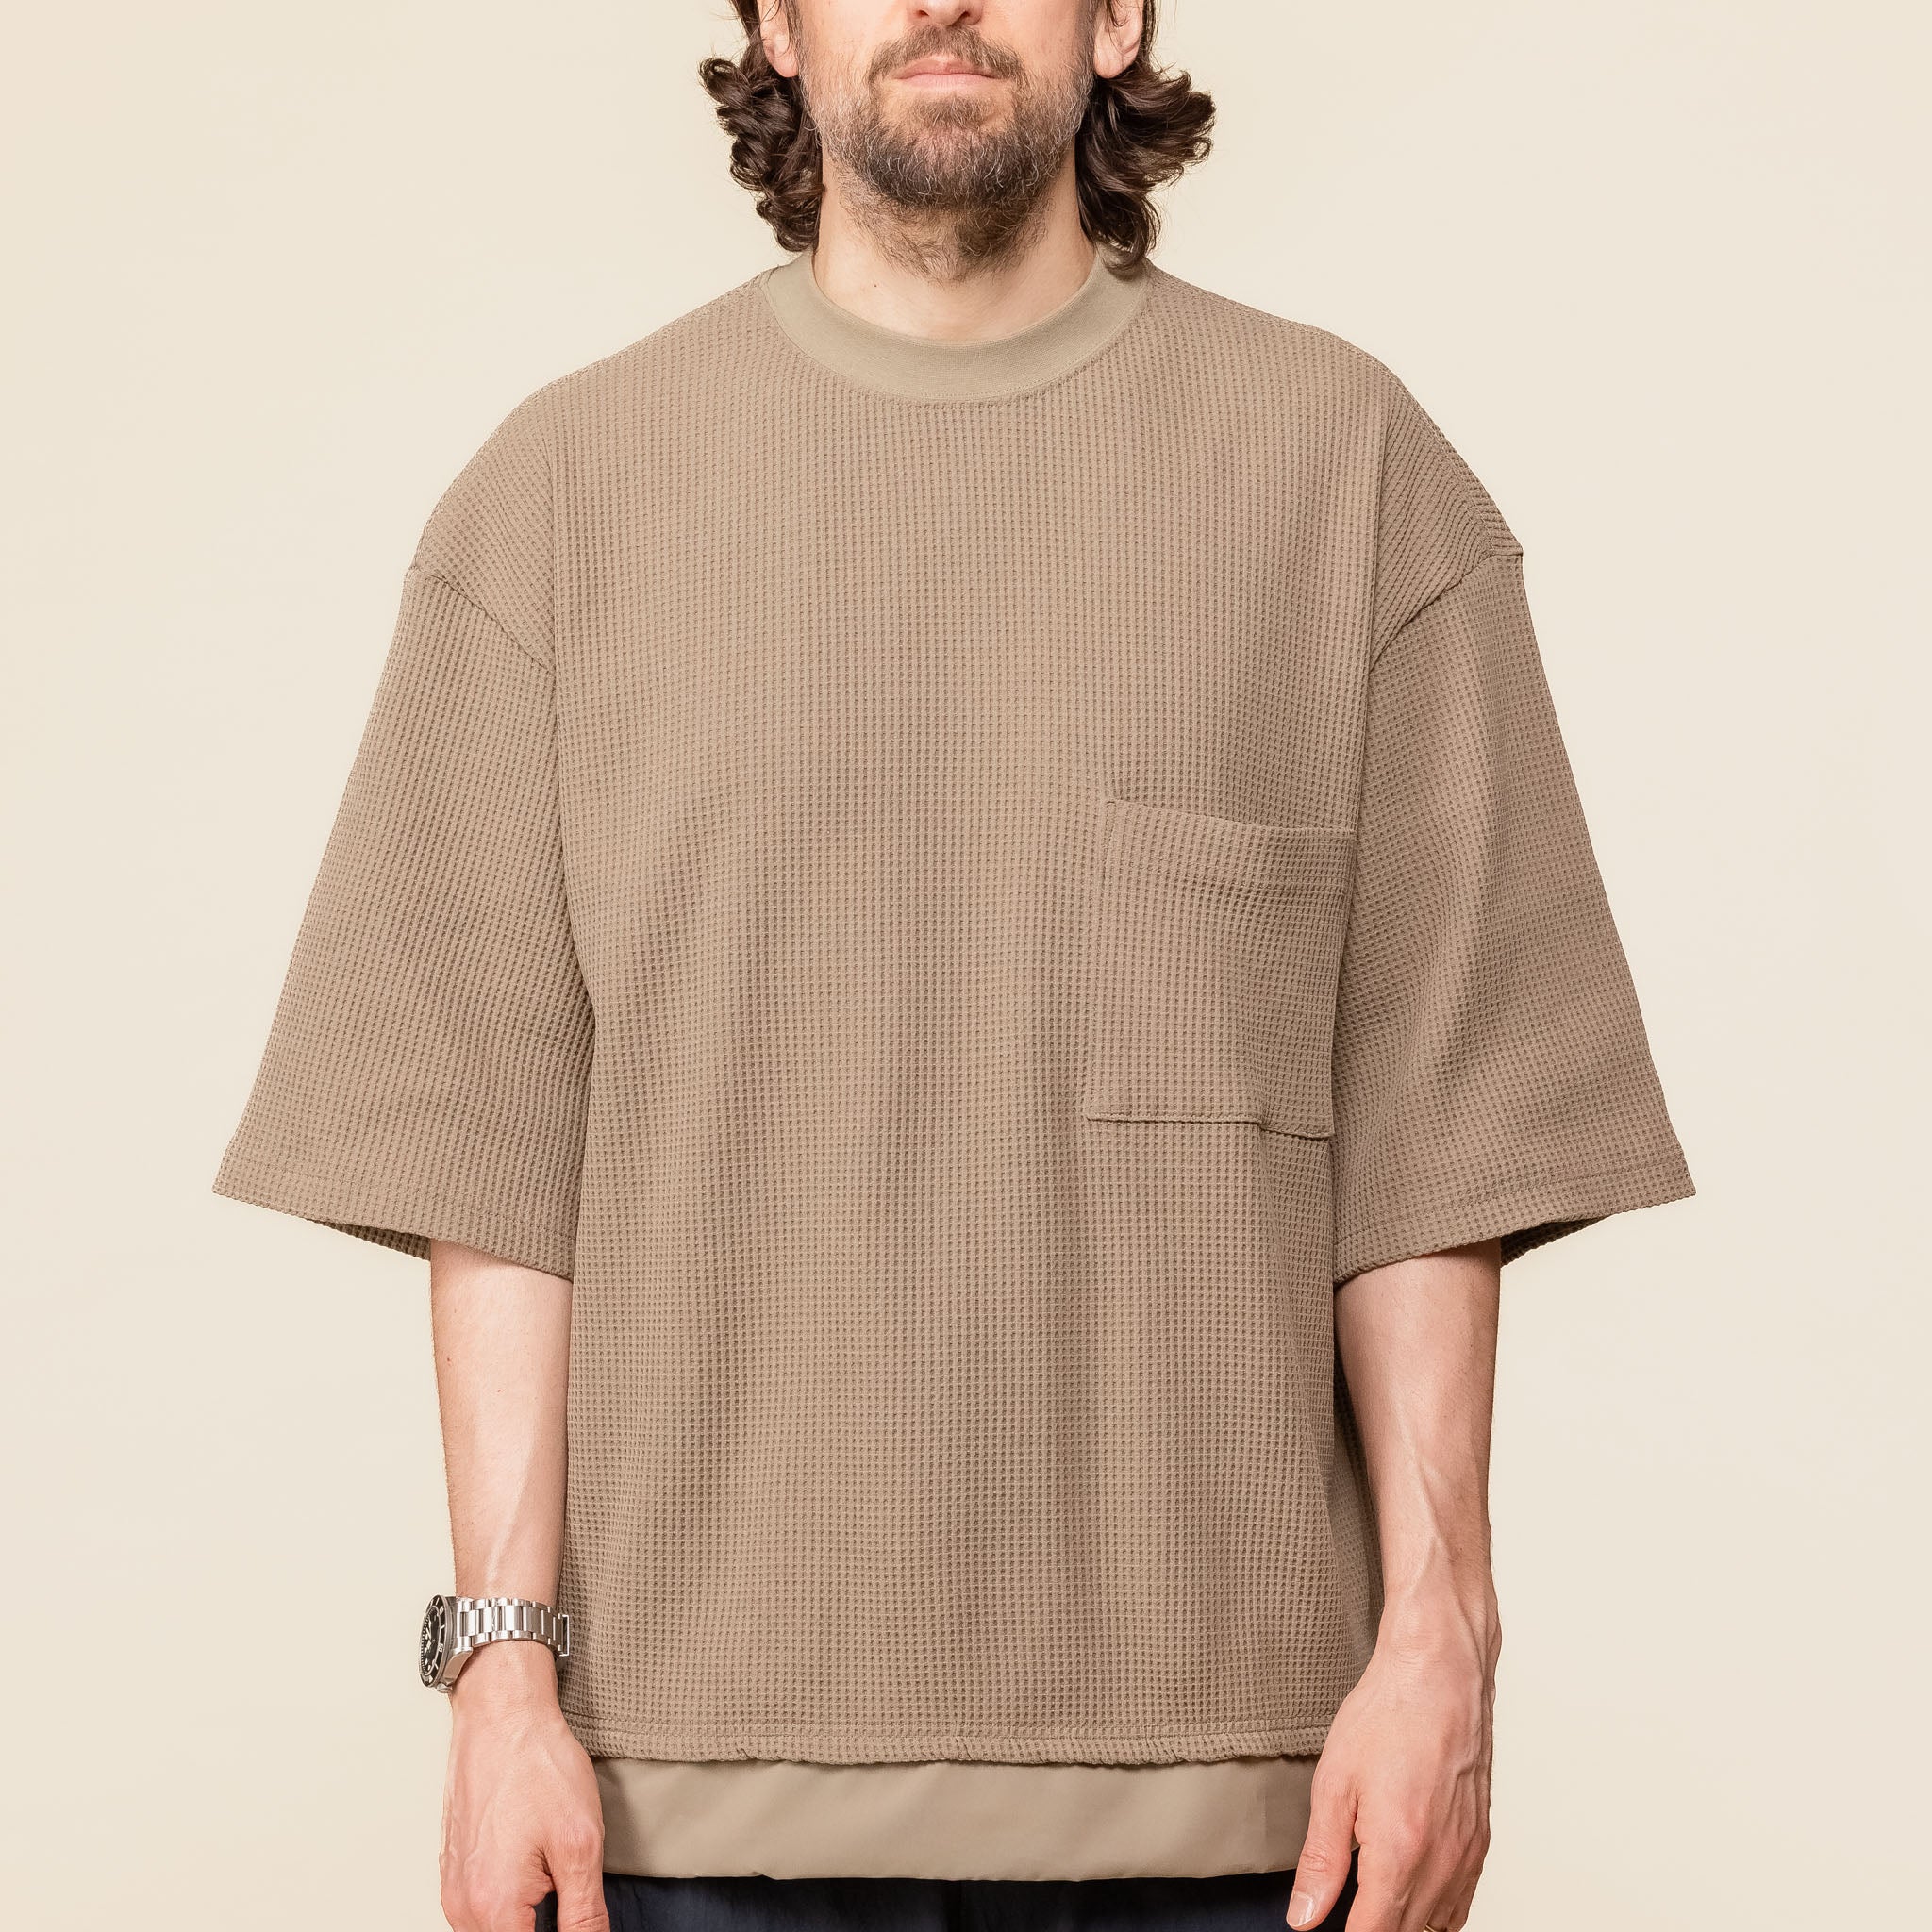 MW-CT24105 Meanswhile - SOLOTEX® Waffle T-Shirt - Bedouin (Brown)